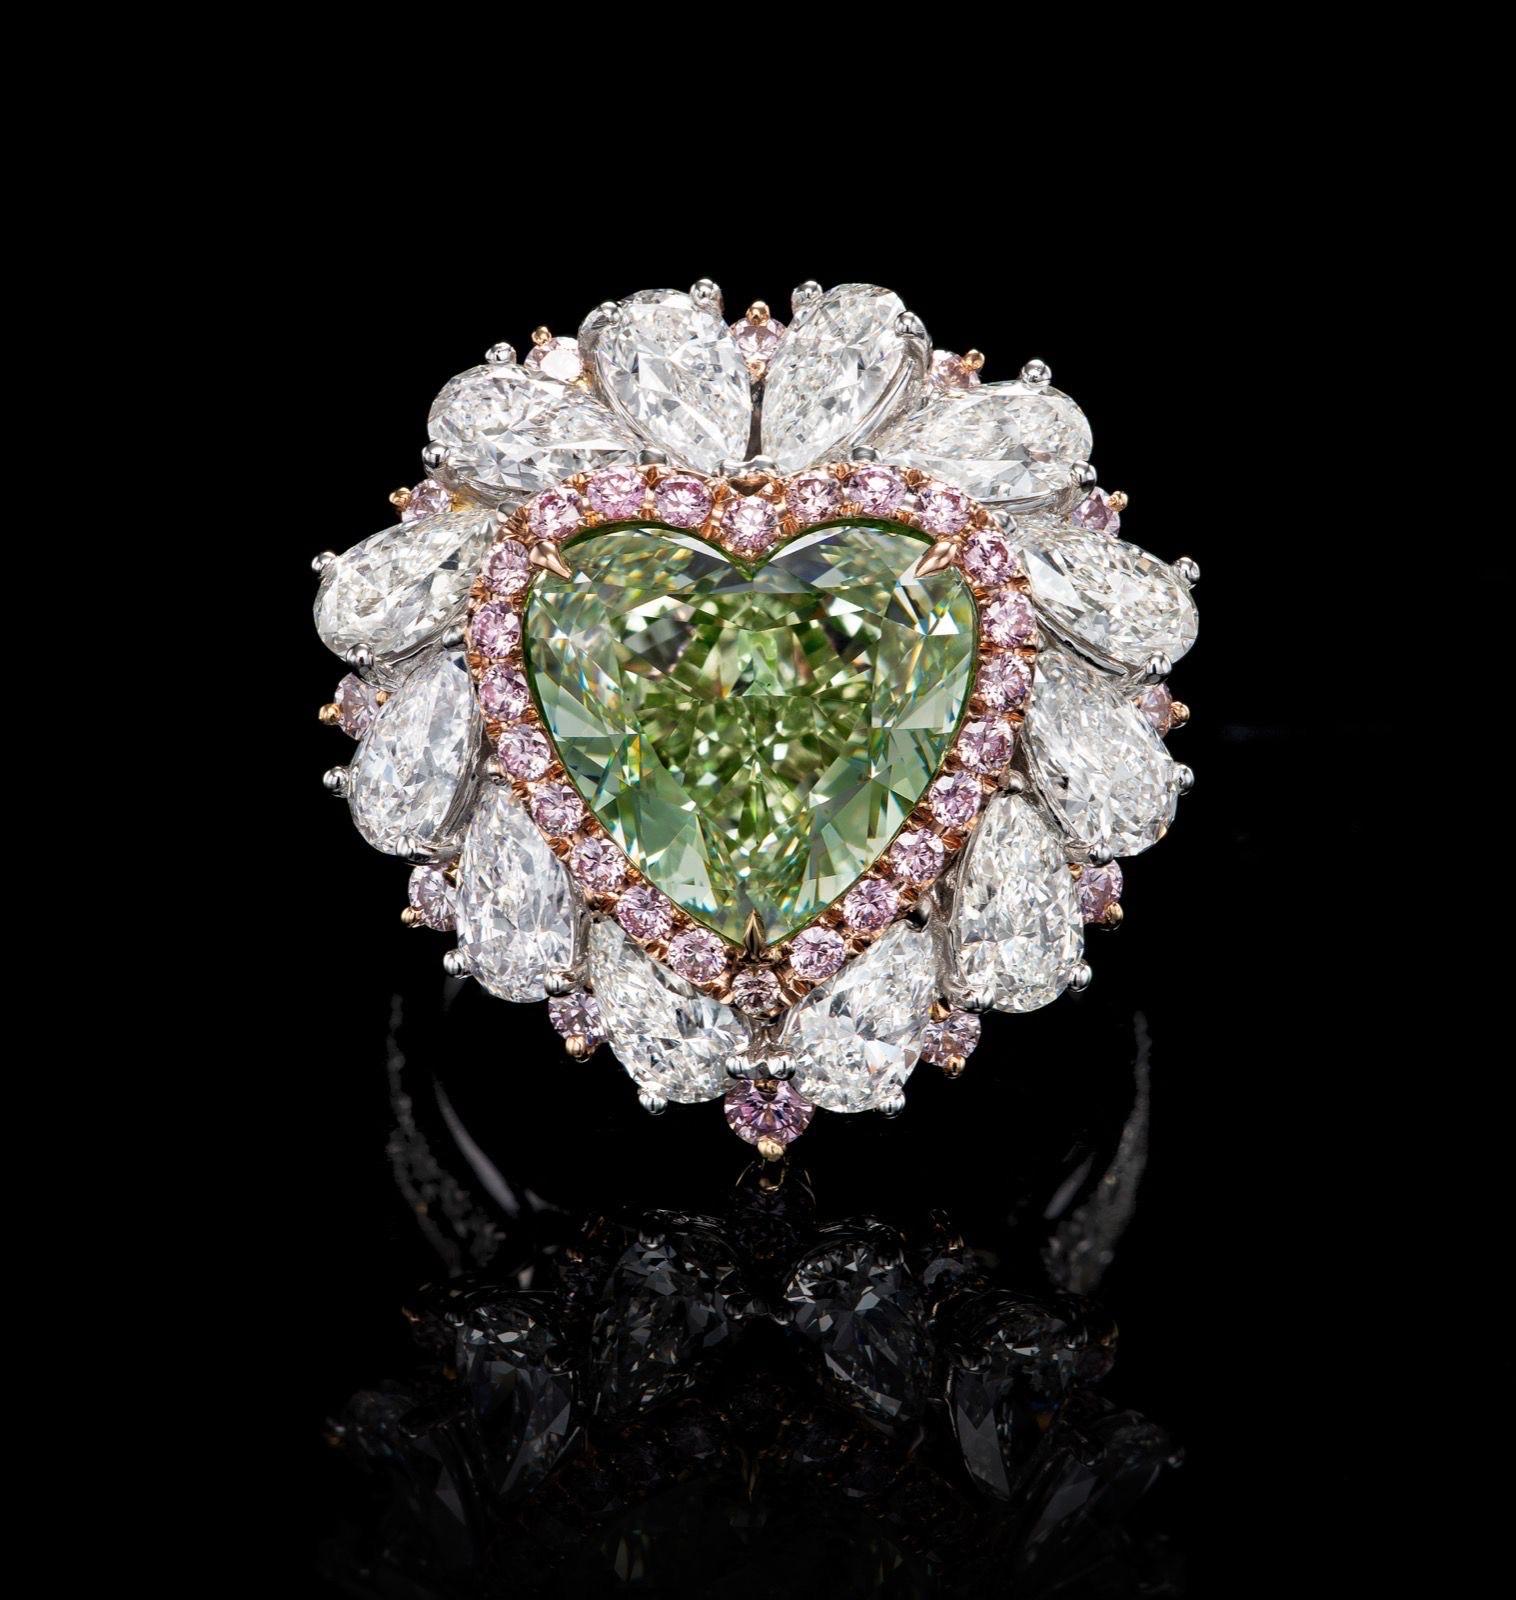 From The Museum Vault at Emilio Jewelry Located on New York's iconic Fifth Avenue,
Showcasing a very special and rare Gia certified natural fancy intense Green heart shape over 6.00 astonishing carats set in the center. 
We specialize in creating